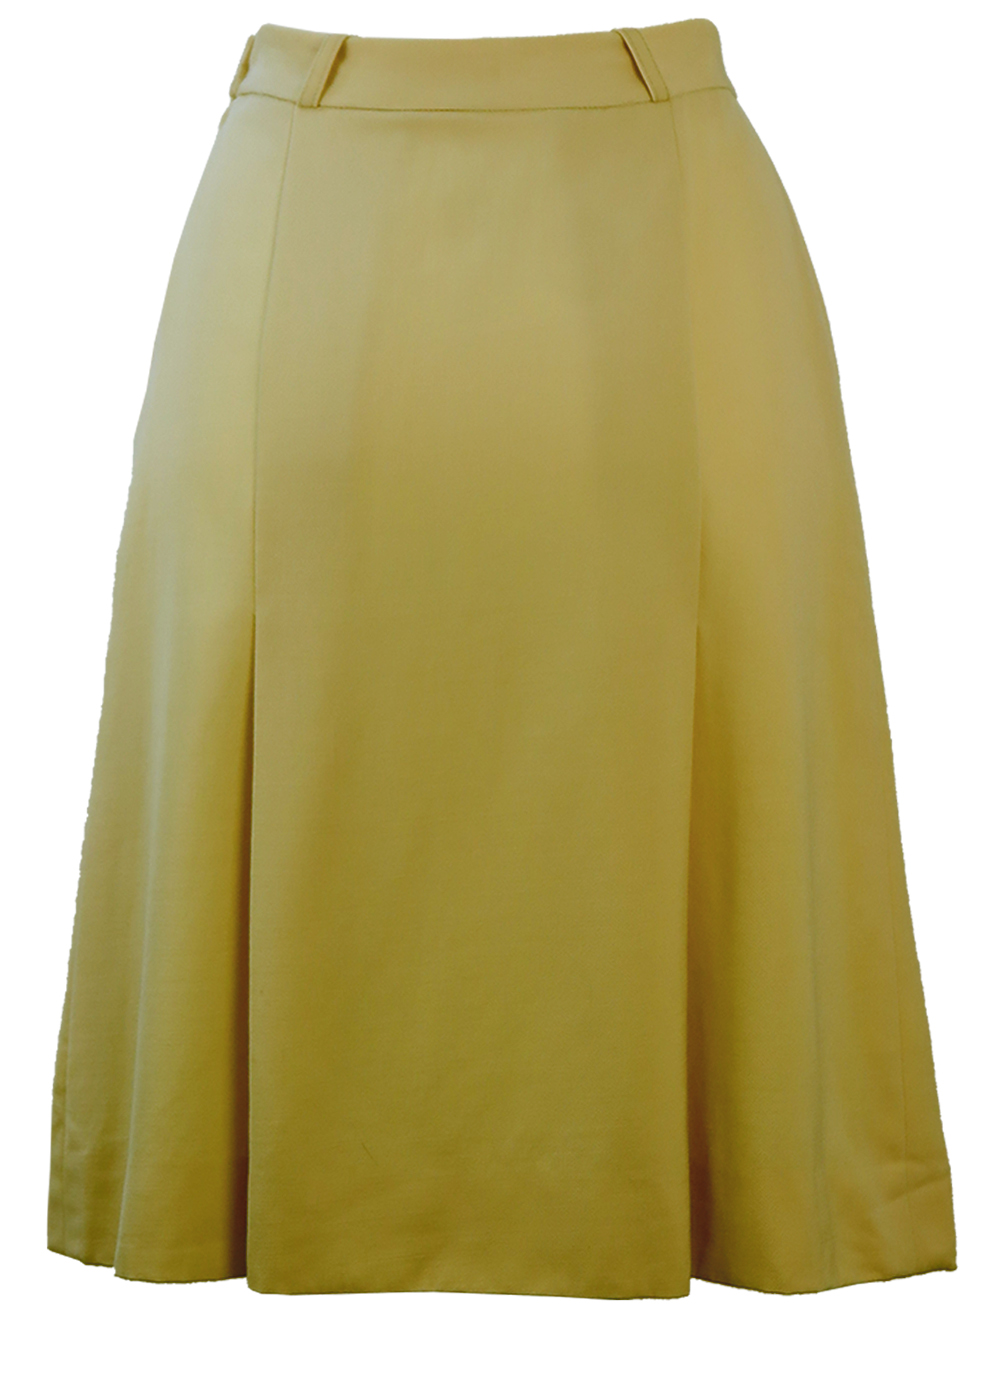 Vintage 80's Cream Knee Length Skirt with Pleat Detail - S | Reign Vintage